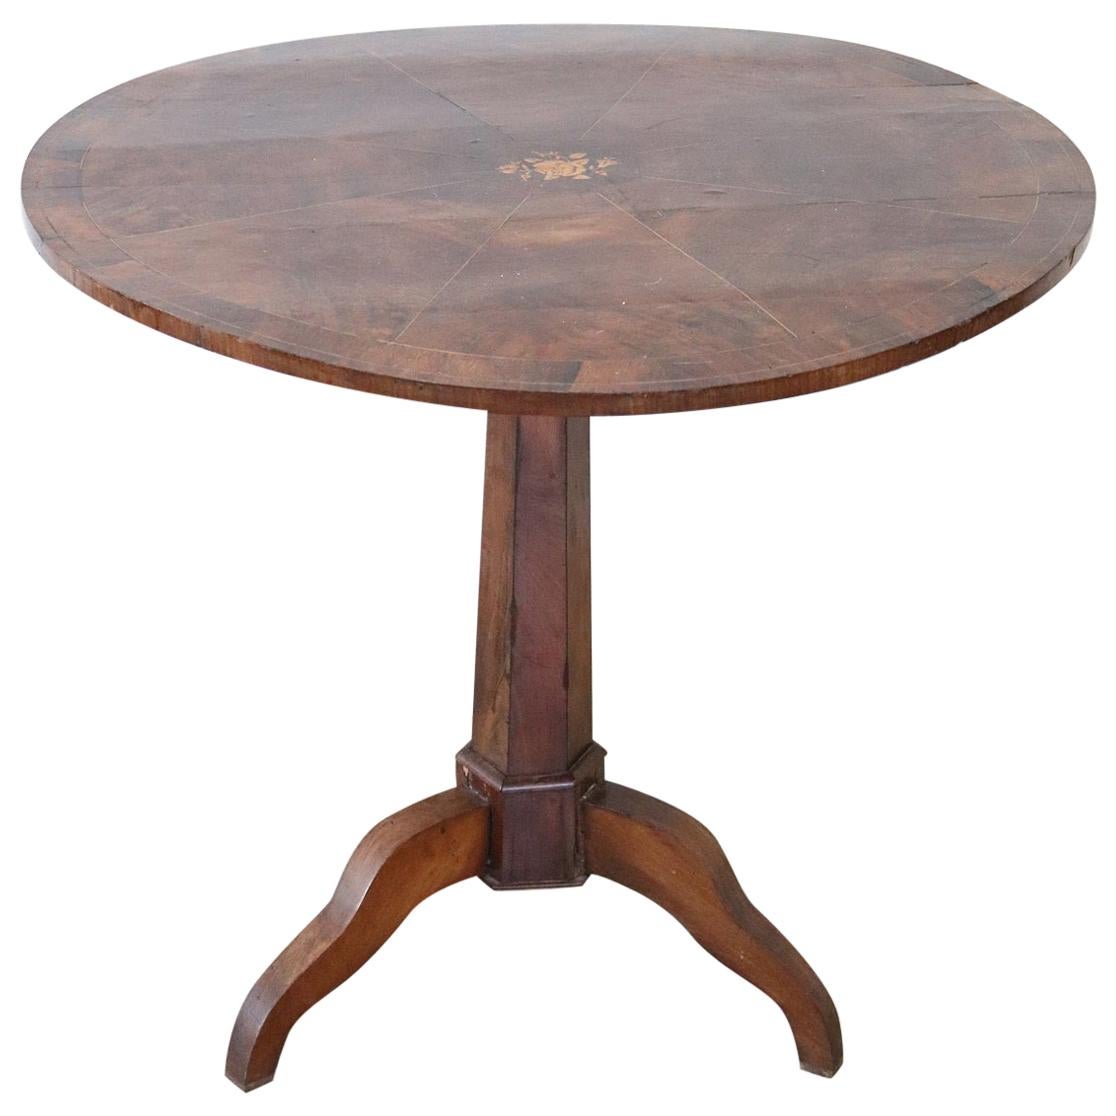 19th Century Italian Briar Root Walnut Inlay Center Table or Pedestal Table